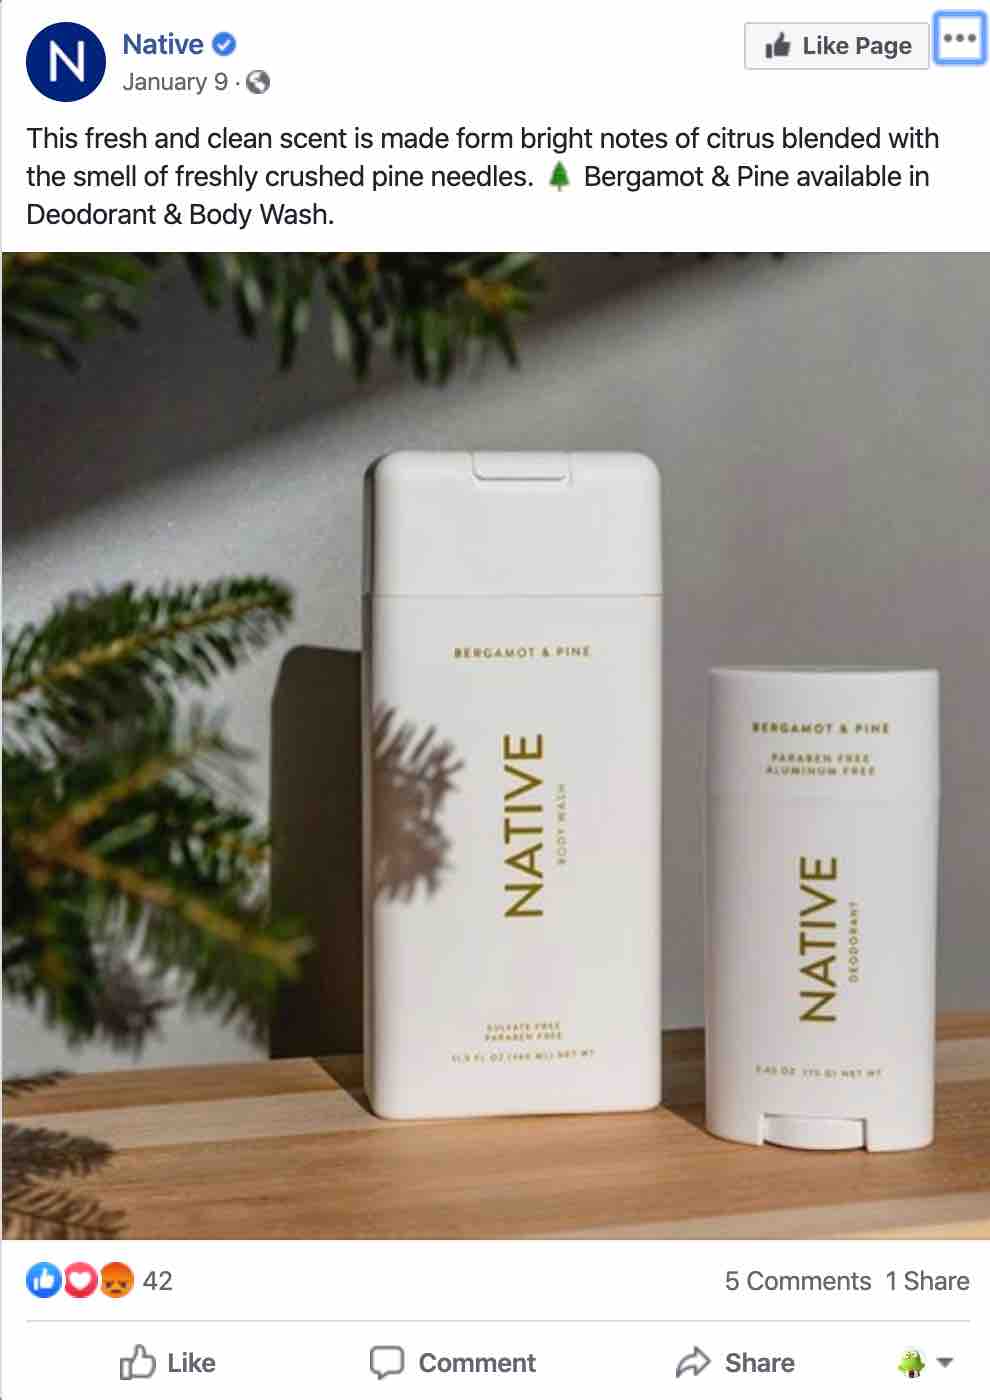 Facebook Ad for Native Deodorant with large picture of deodorant tube